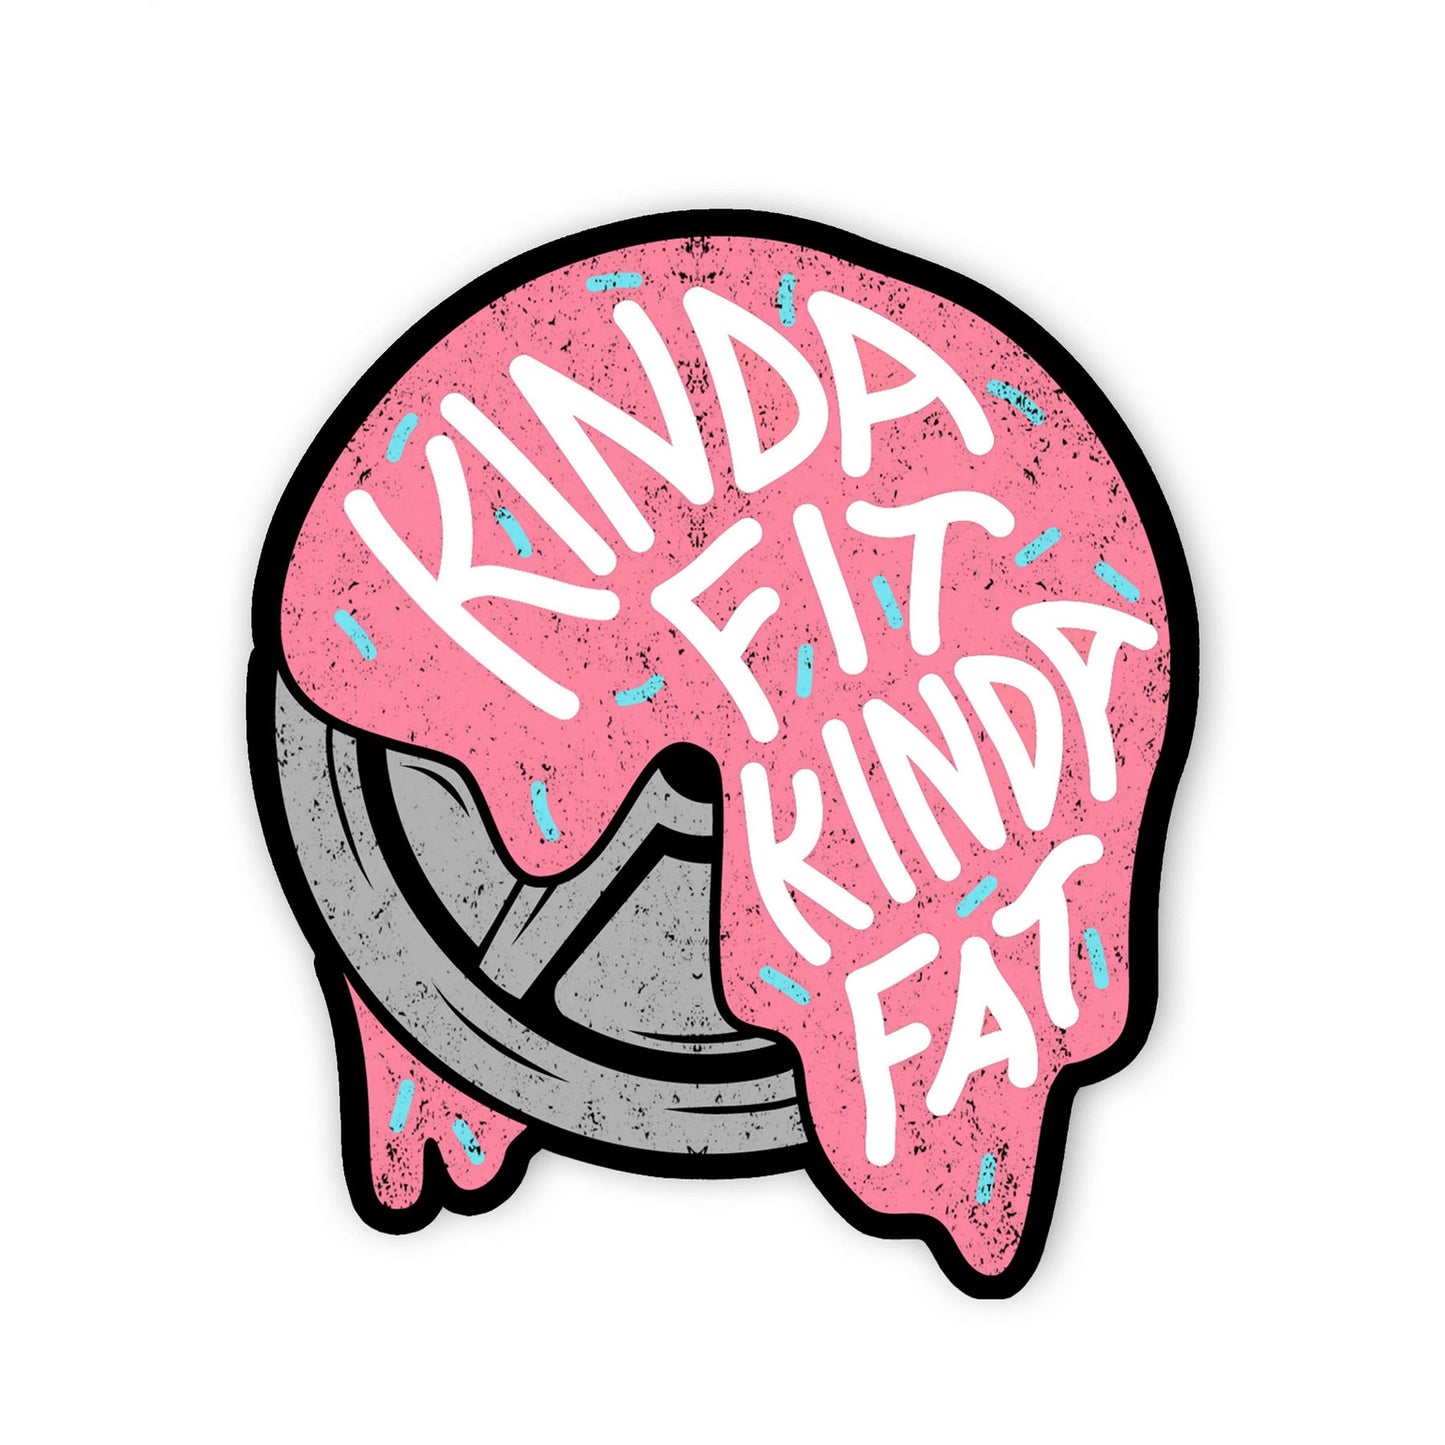 Kinda Fit Kinda Fat Frosted Plates Sticker - 9 for 9